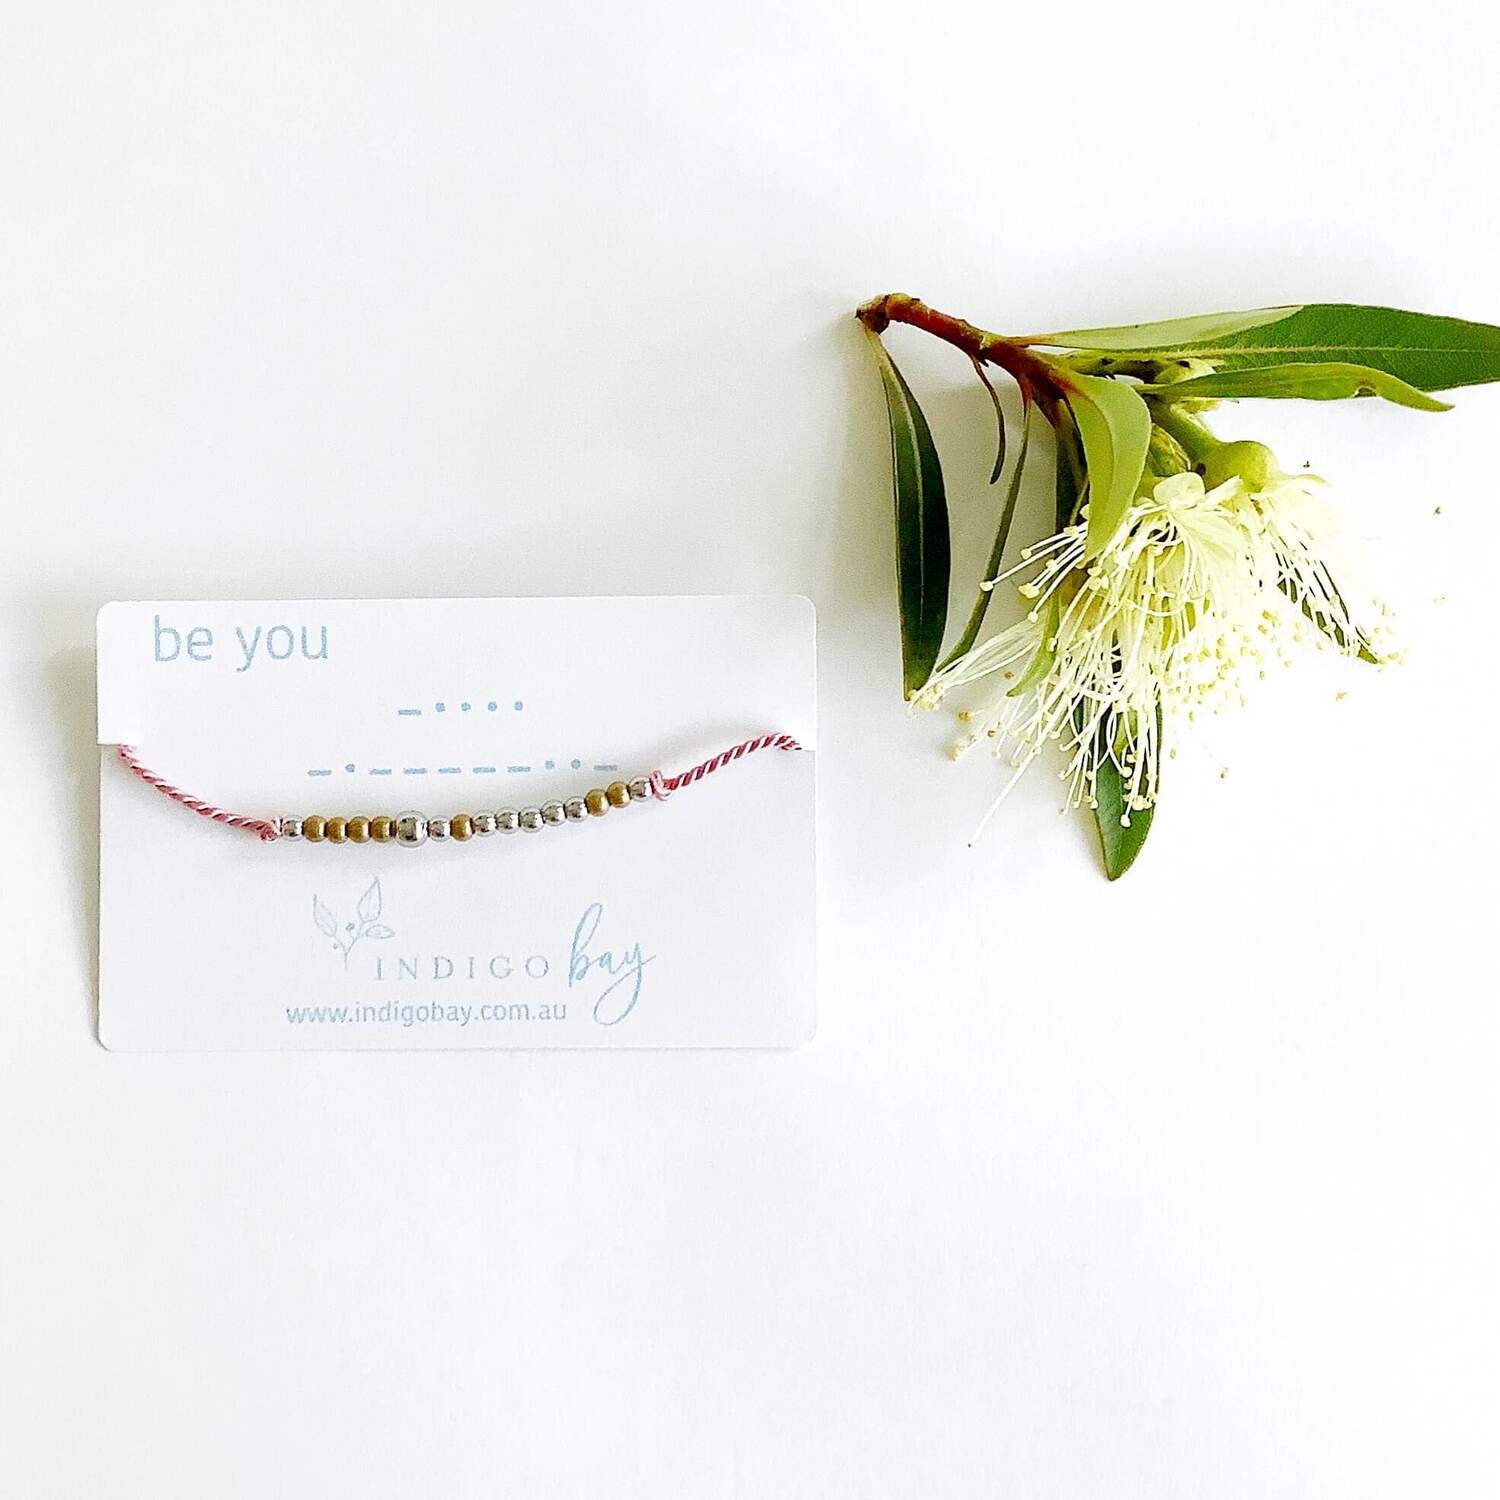 Be you beaded bracelet on a white card with blue text